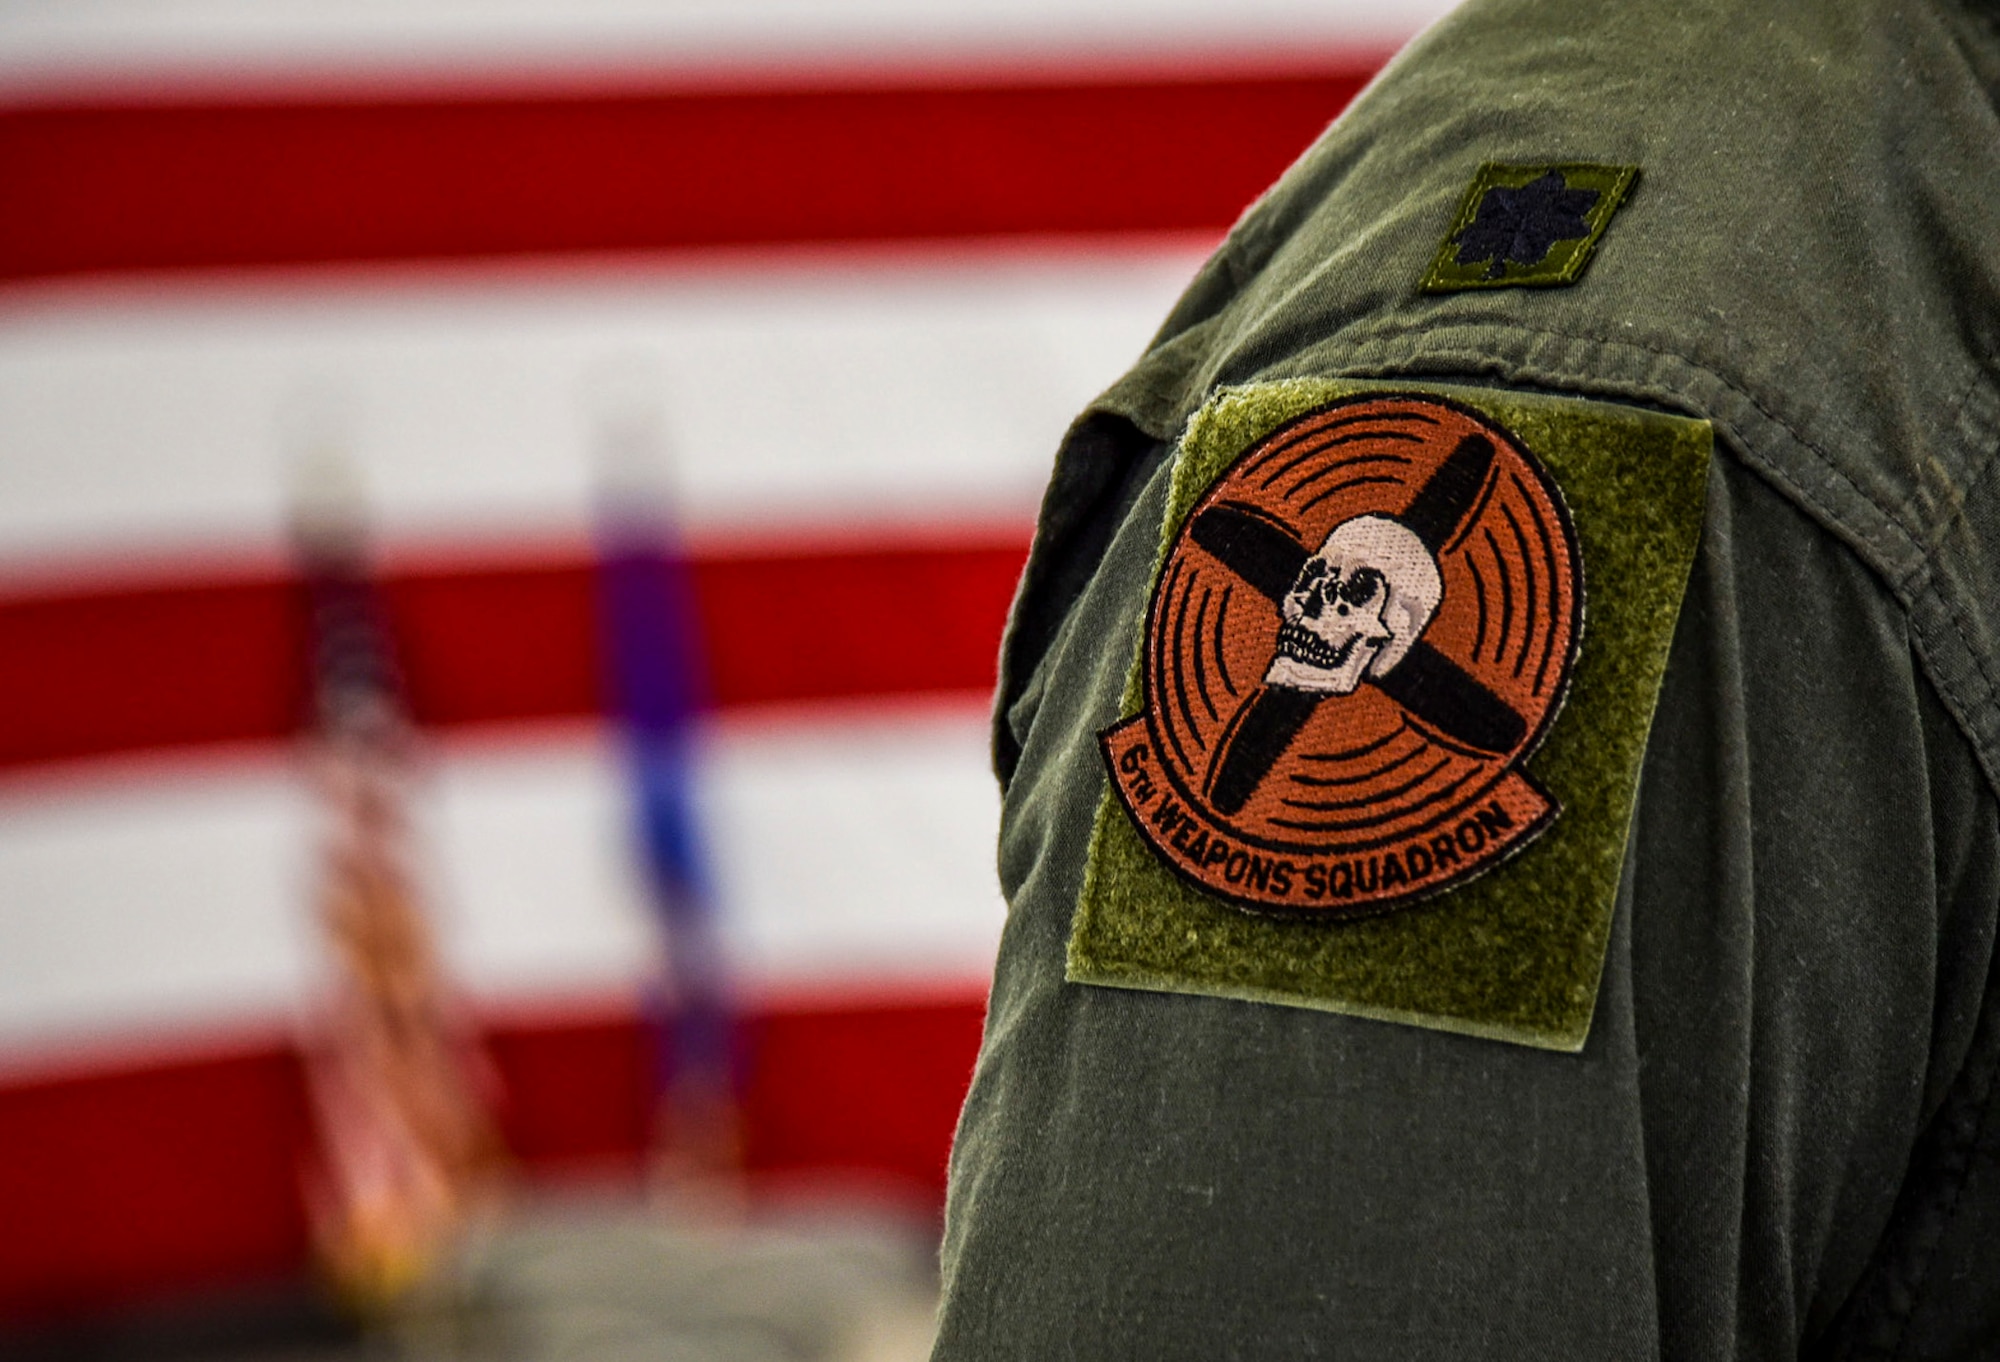 Lt. Col. Michael Blauser, 6th Weapons Squadron commander, displays the 6th WPS patch. The patch has represented the squadron since 1917 and features a skull at the center of spinning propellers. (U.S. Air Force photo by Airman 1st Class Andrew D. Sarver/Released)